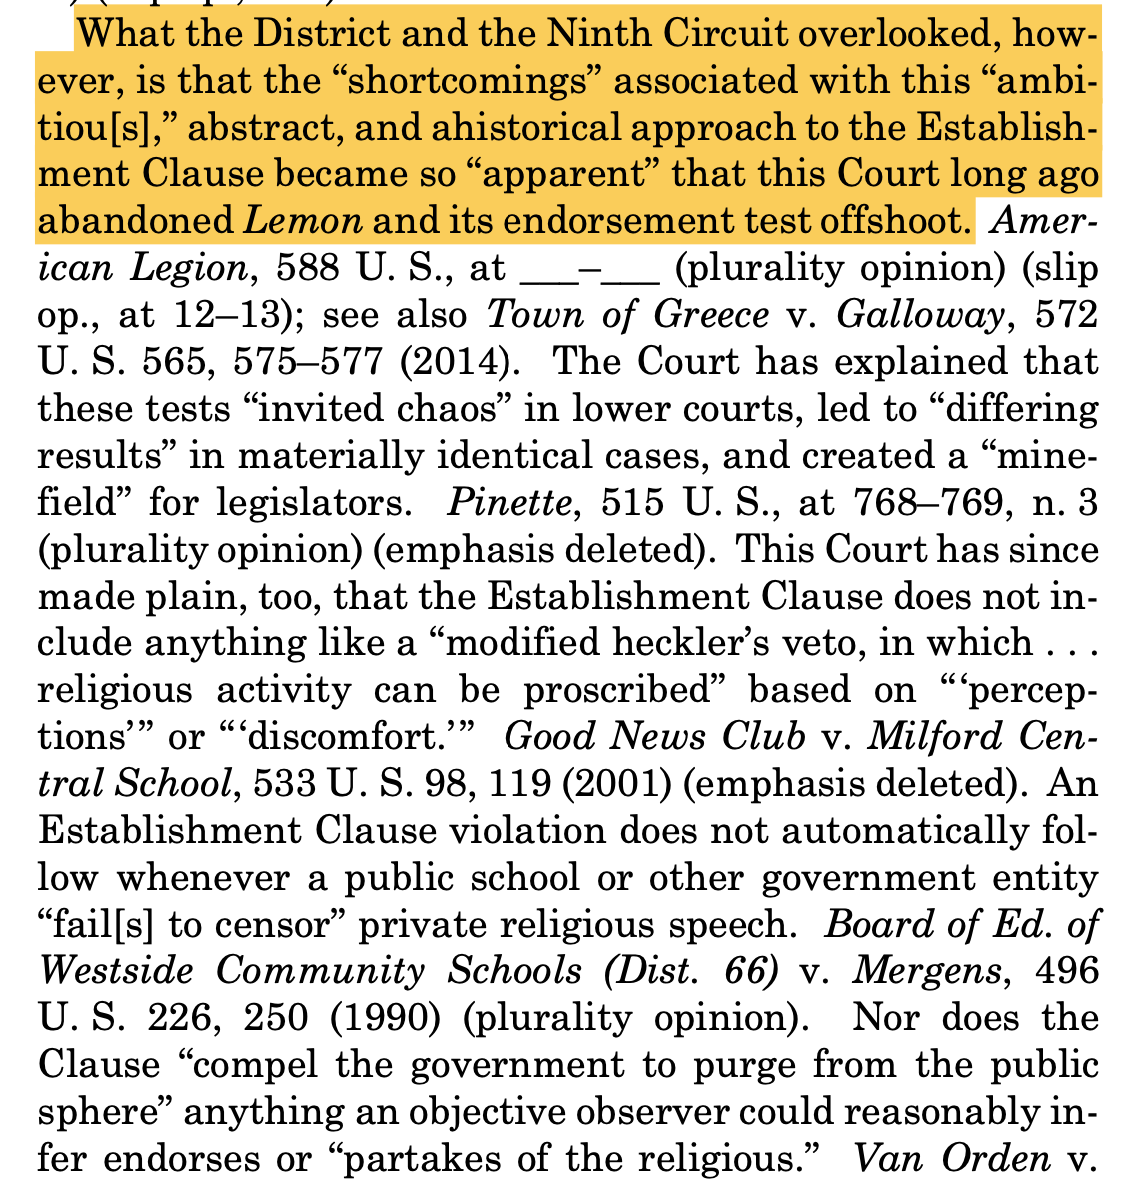 "What the District and the Ninth Circuit overlooked, however, is that the “shortcomings” associated with this “ambitiou[s],” abstract, and ahistorical approach to the Establishment Clause became so “apparent” that this Court long ago abandoned Lemon and its endorsement test offshoot. American Legion (plurality opinion); see also Town of Greece. The Court has explained that these tests “invited chaos” in lower courts...and created a “minefield” for legislators. Pinette (plurality opinion). This Court has since made plain, too, that the Establishment Clause does not include anything like a “modified heckler’s veto.” Good News Club. An Establishment Clause violation does not automatically follow whenever a public school or other government entity “fail[s] to censor” private religious speech. Mergens (plurality opinion). Nor does the Clause “compel the government to purge from the public sphere” anything an objective observer could reasonably infer endorses or “partakes of the religious.”"